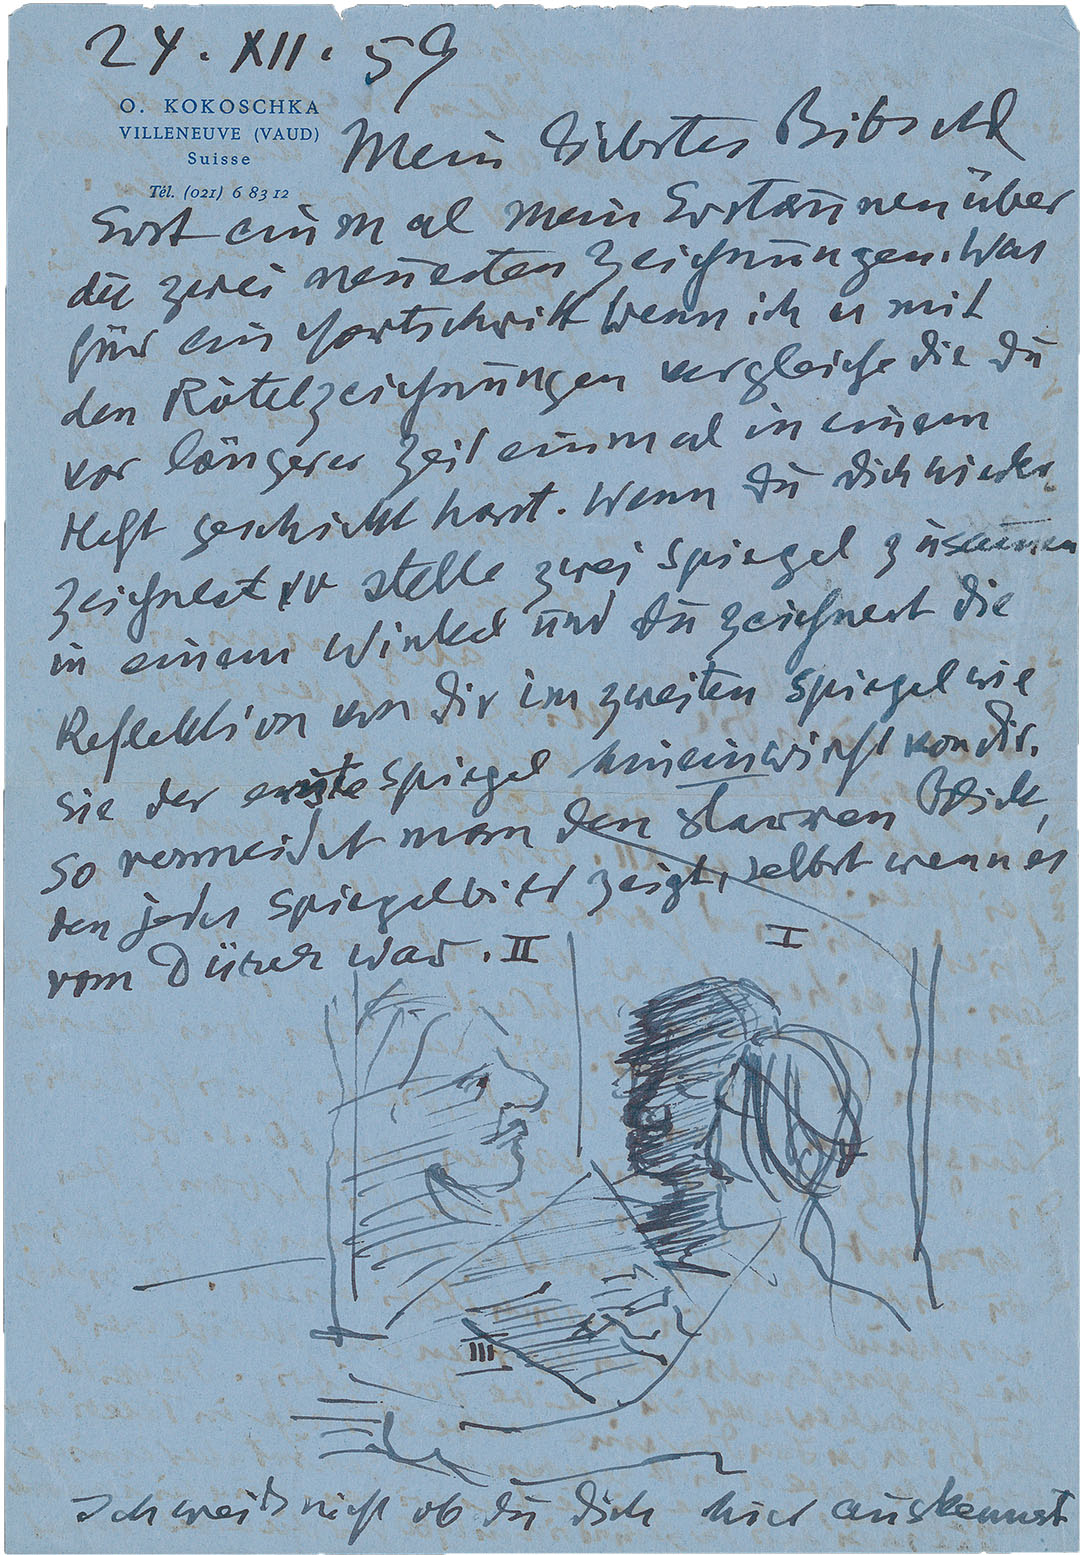 Kokoschka often embellished letters to his family and friends with witty drawings. Here, he explains to his sister Berta (Bibschl) Patocka the trick of using two mirrors to create a successful self-portrait. December 1959 (ZBZ, estate of O. Kokoschka 24.8)